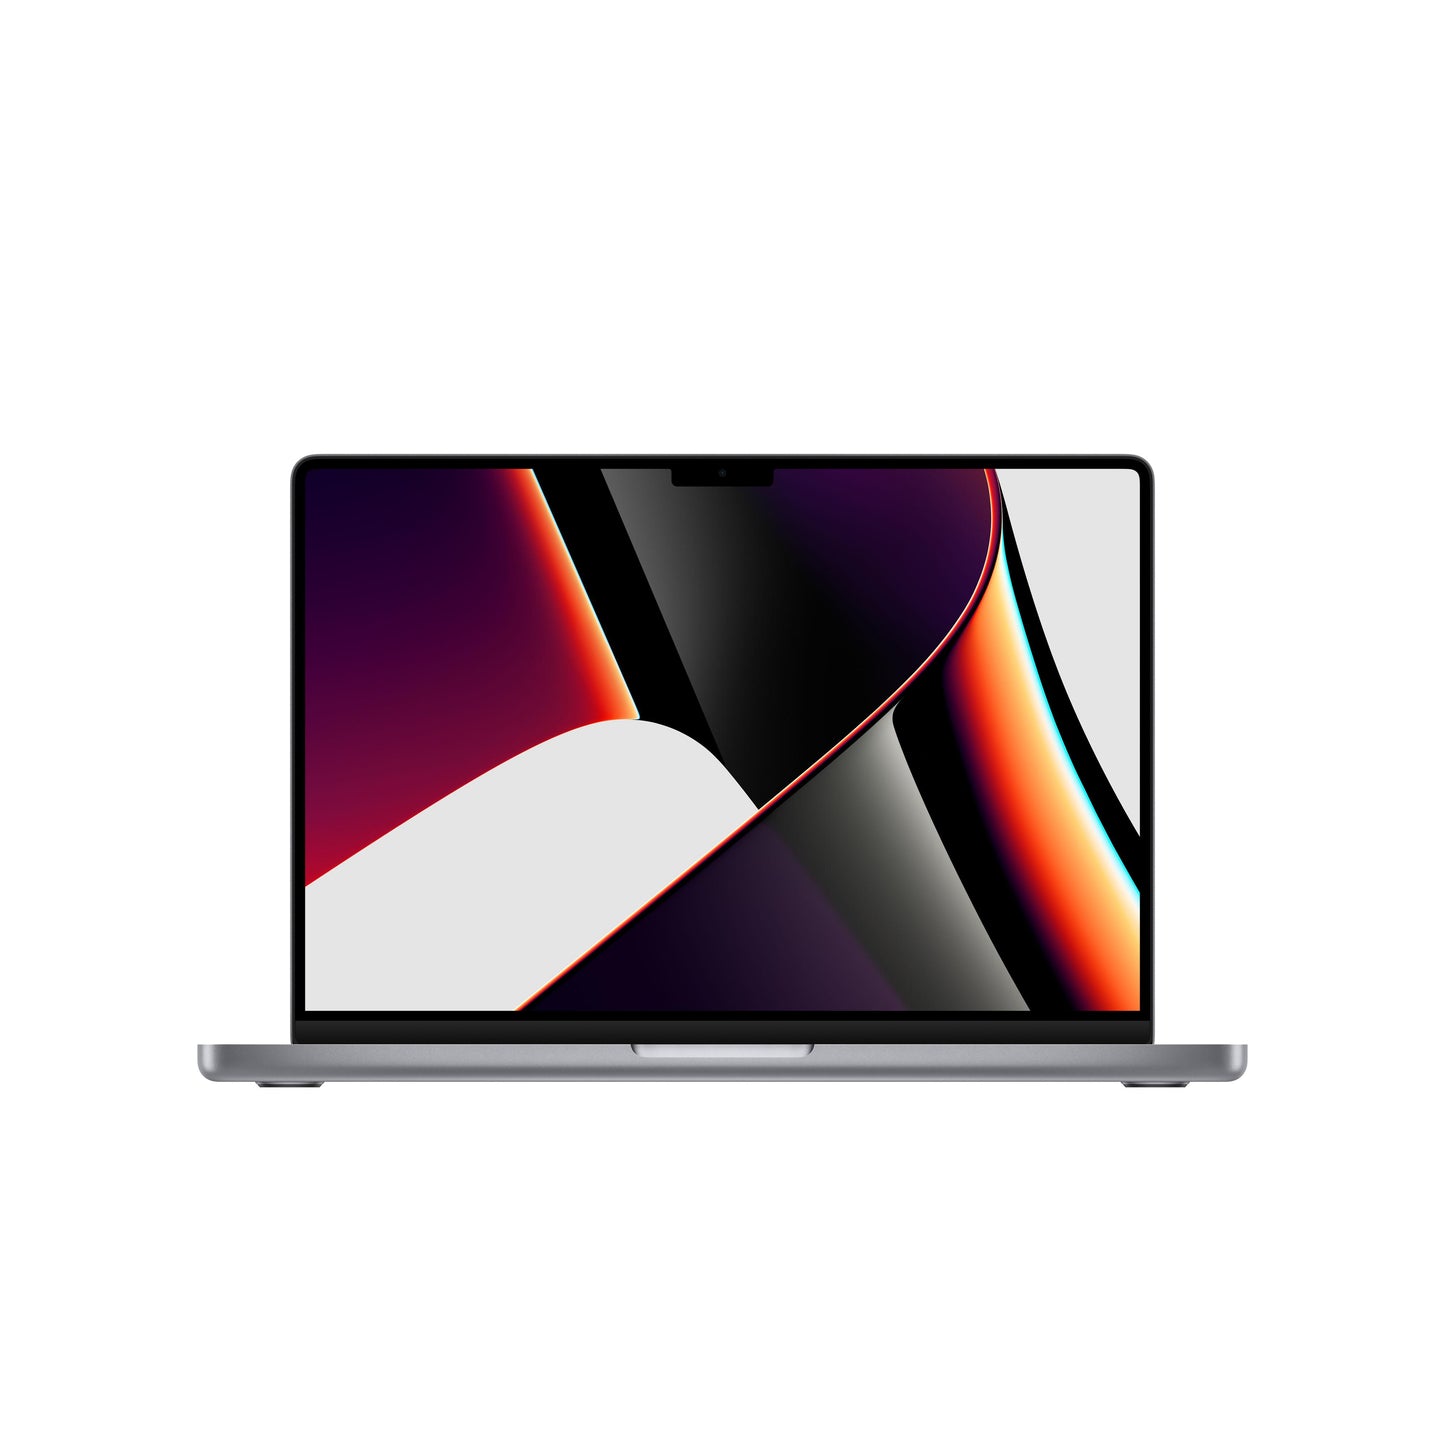 14-inch MacBook Pro: Apple M1 Pro chip with 10_core CPU and 16_core GPU, 1TB SSD - Space Grey